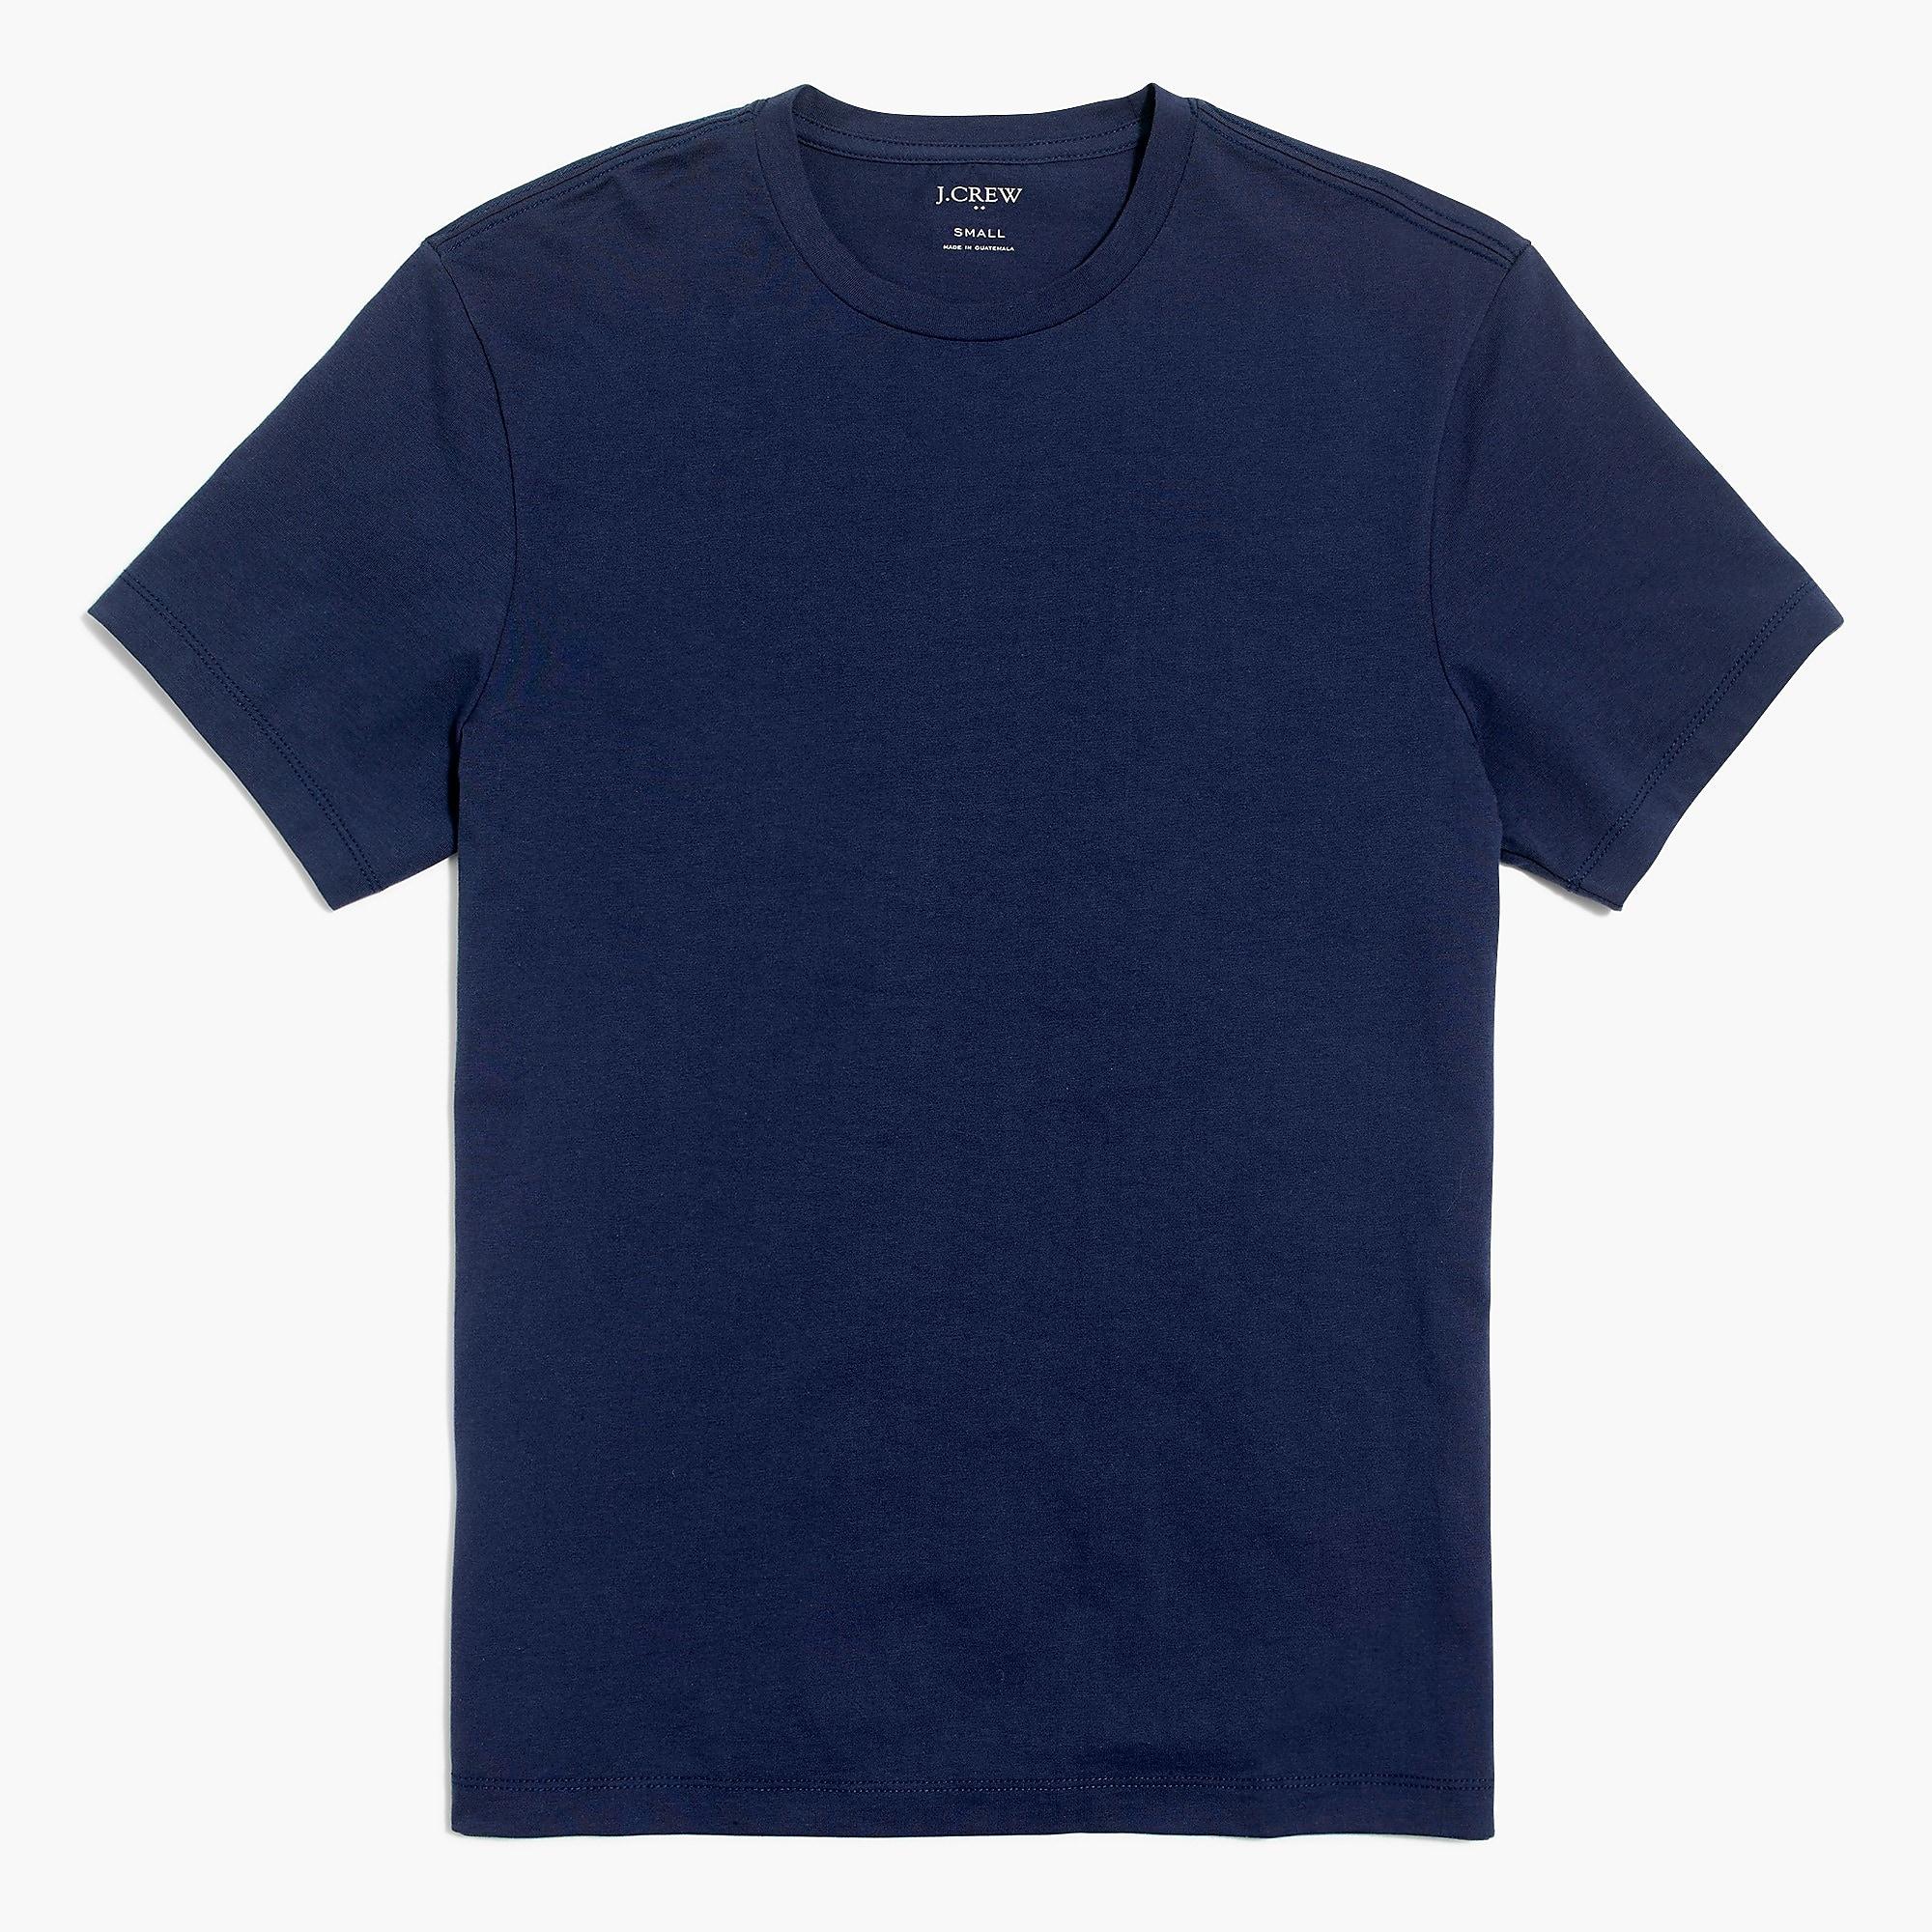 J.Crew Cotton Washed Jersey T-shirt in Navy (Blue) for Men - Save 8% - Lyst